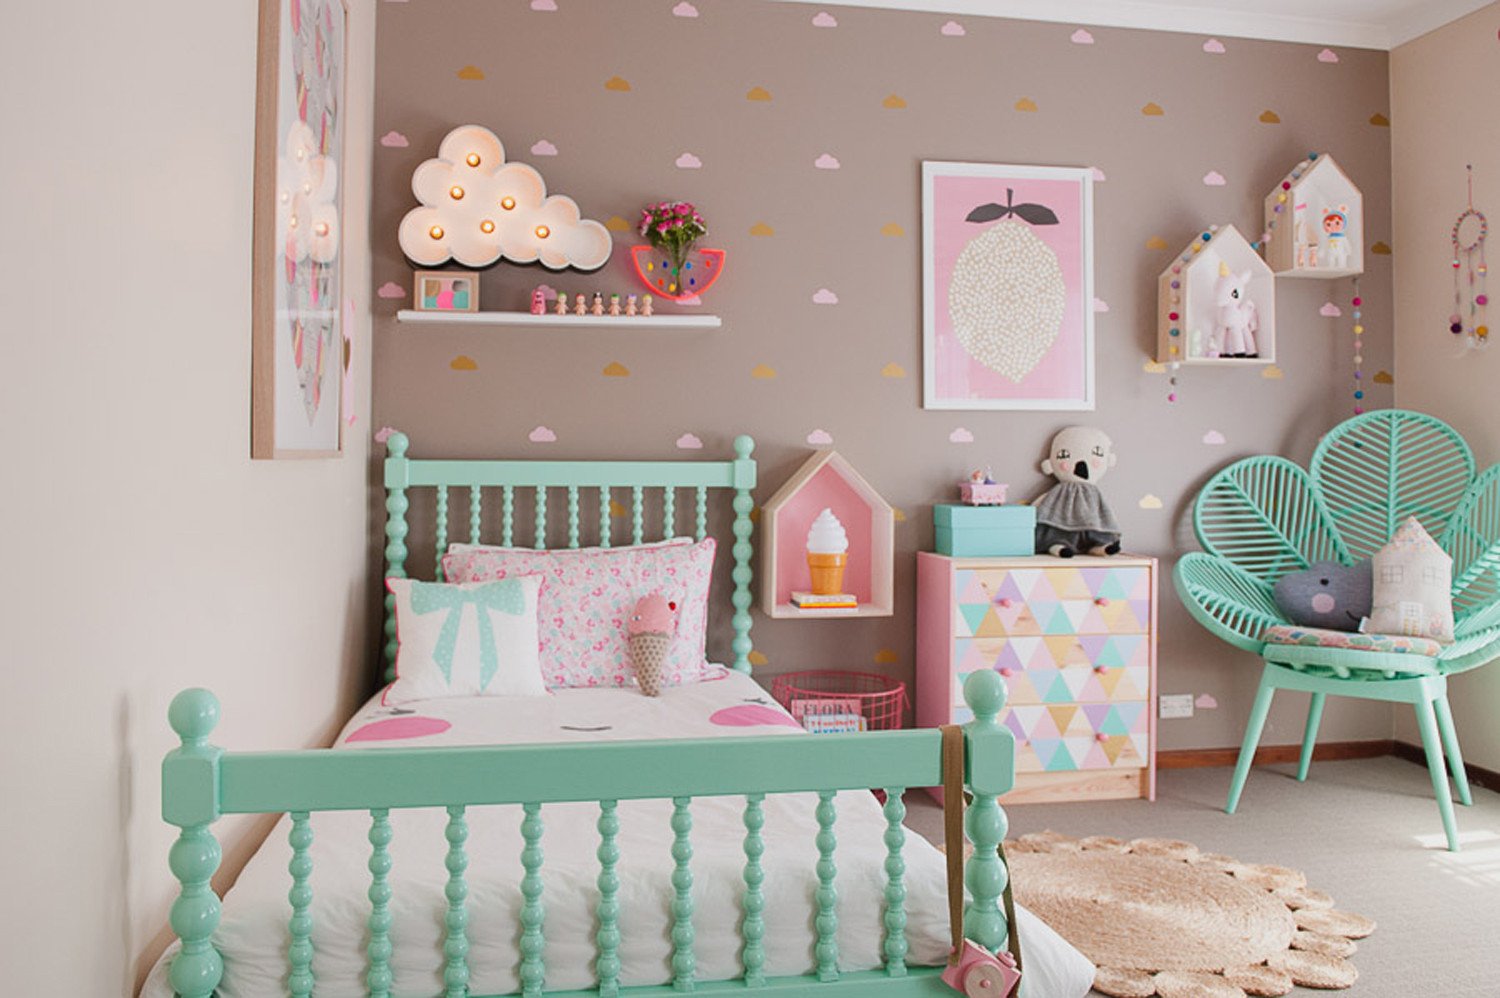 Kids Bedroom Themes
 27 Stylish Ways to Decorate your Children s Bedroom The